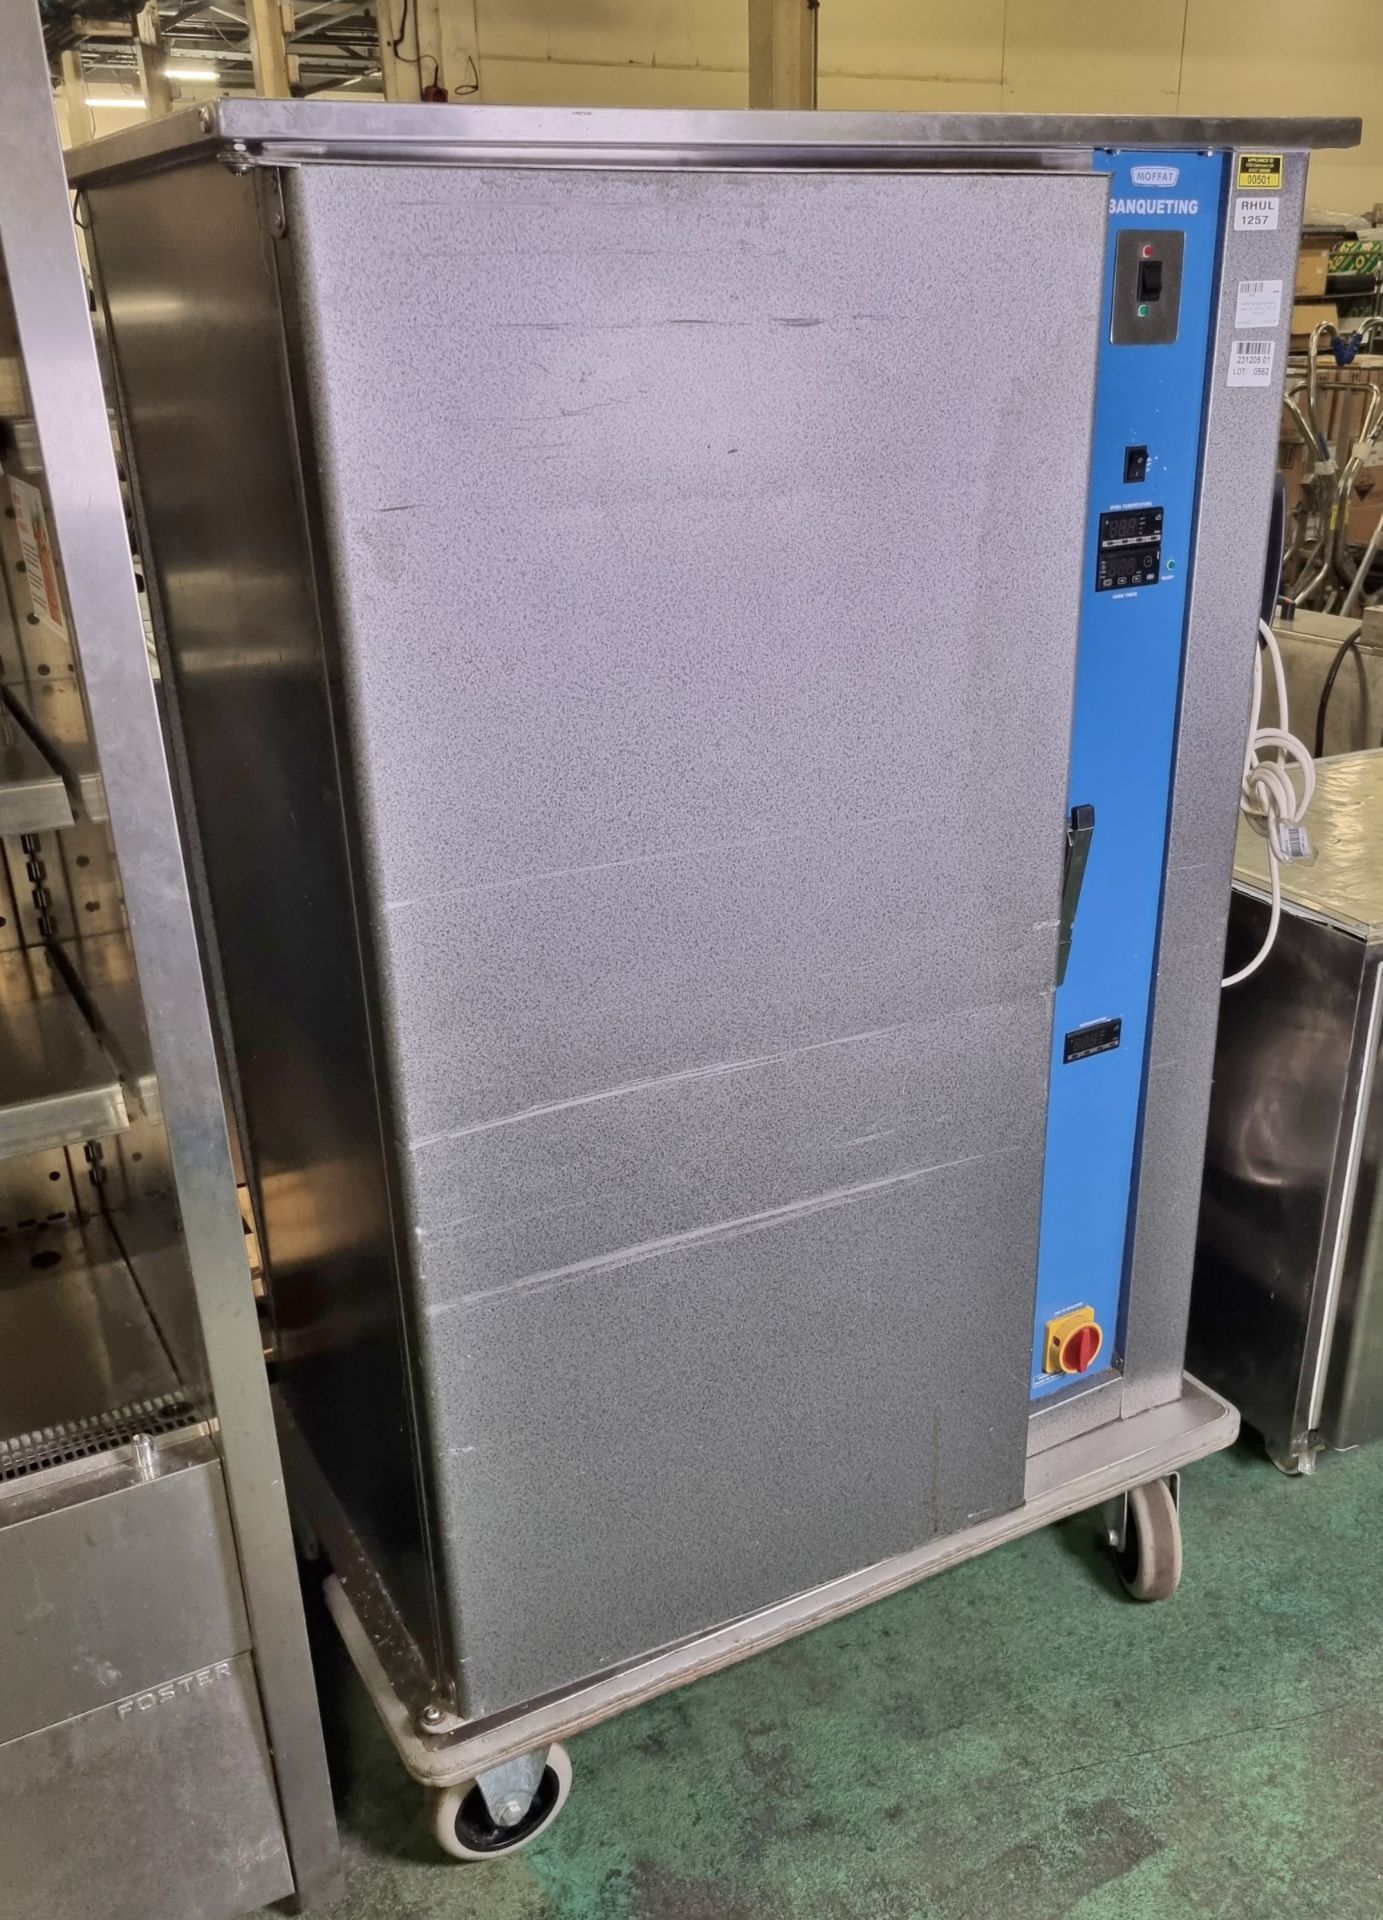 Moffat banqueting electric oven - W 1000 x D 700 x H 1580mm - Image 2 of 5